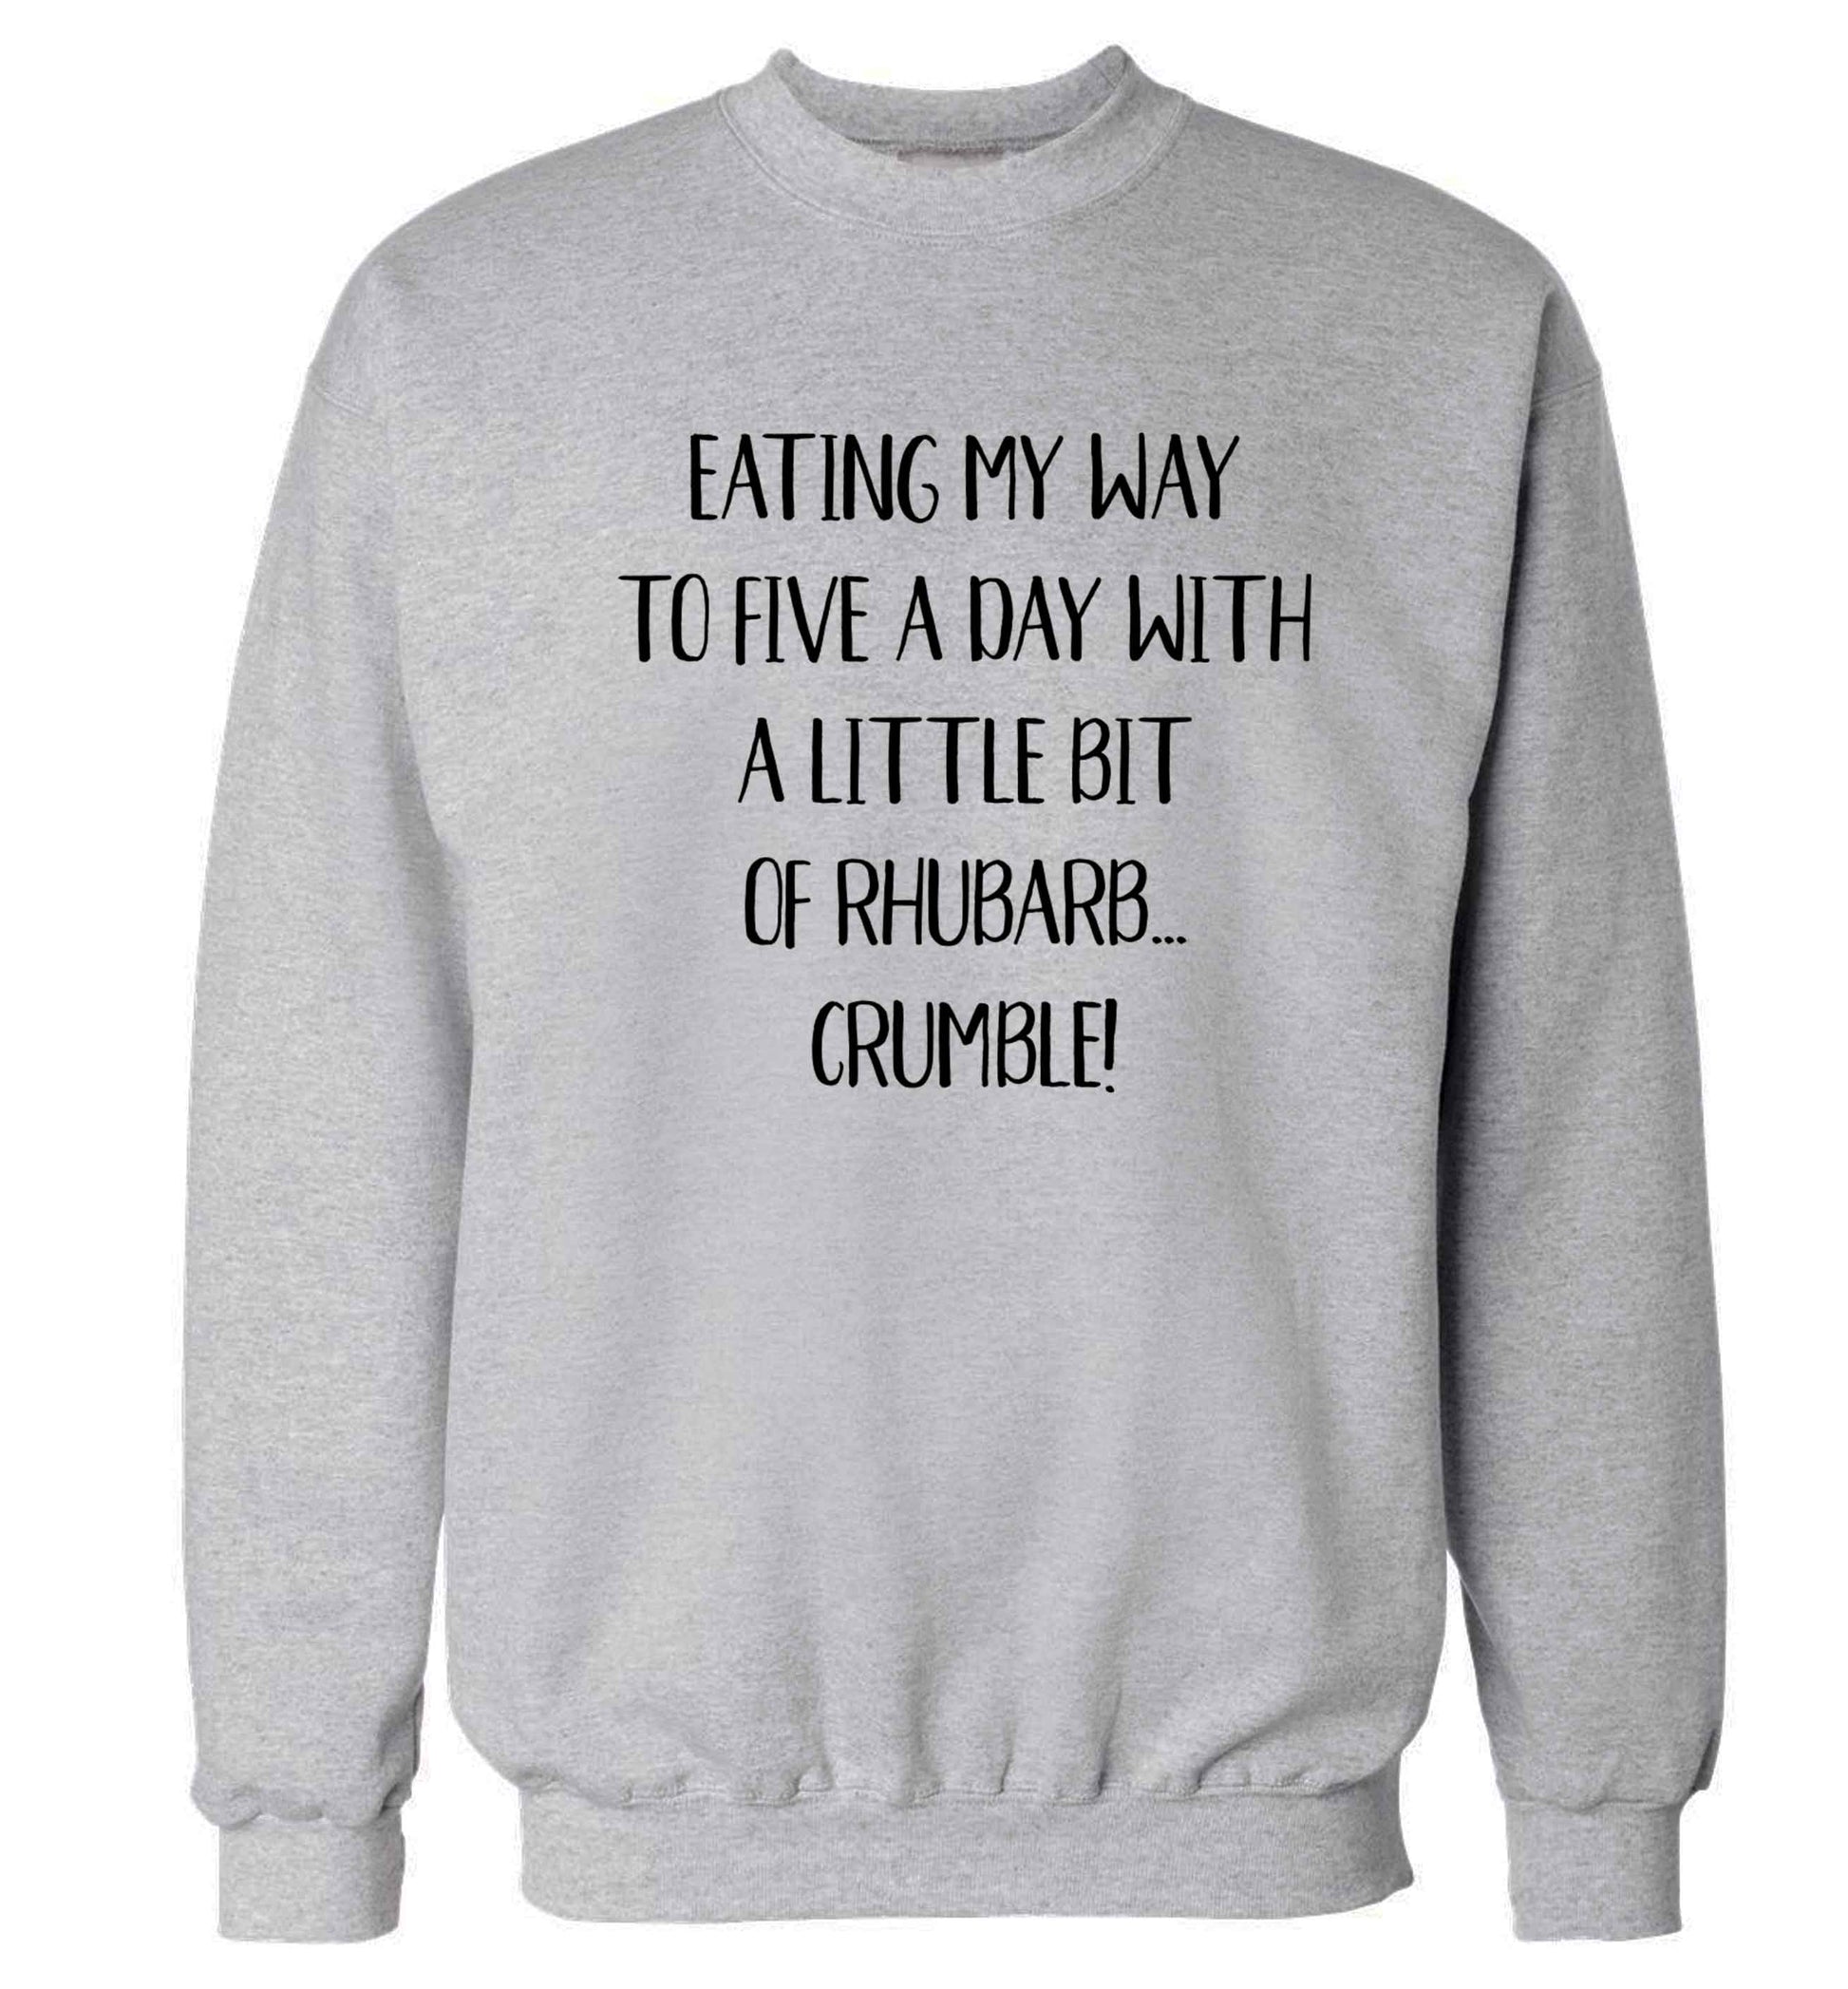 Eating my way to five a day with a little bit of rhubarb crumble Adult's unisex grey Sweater 2XL